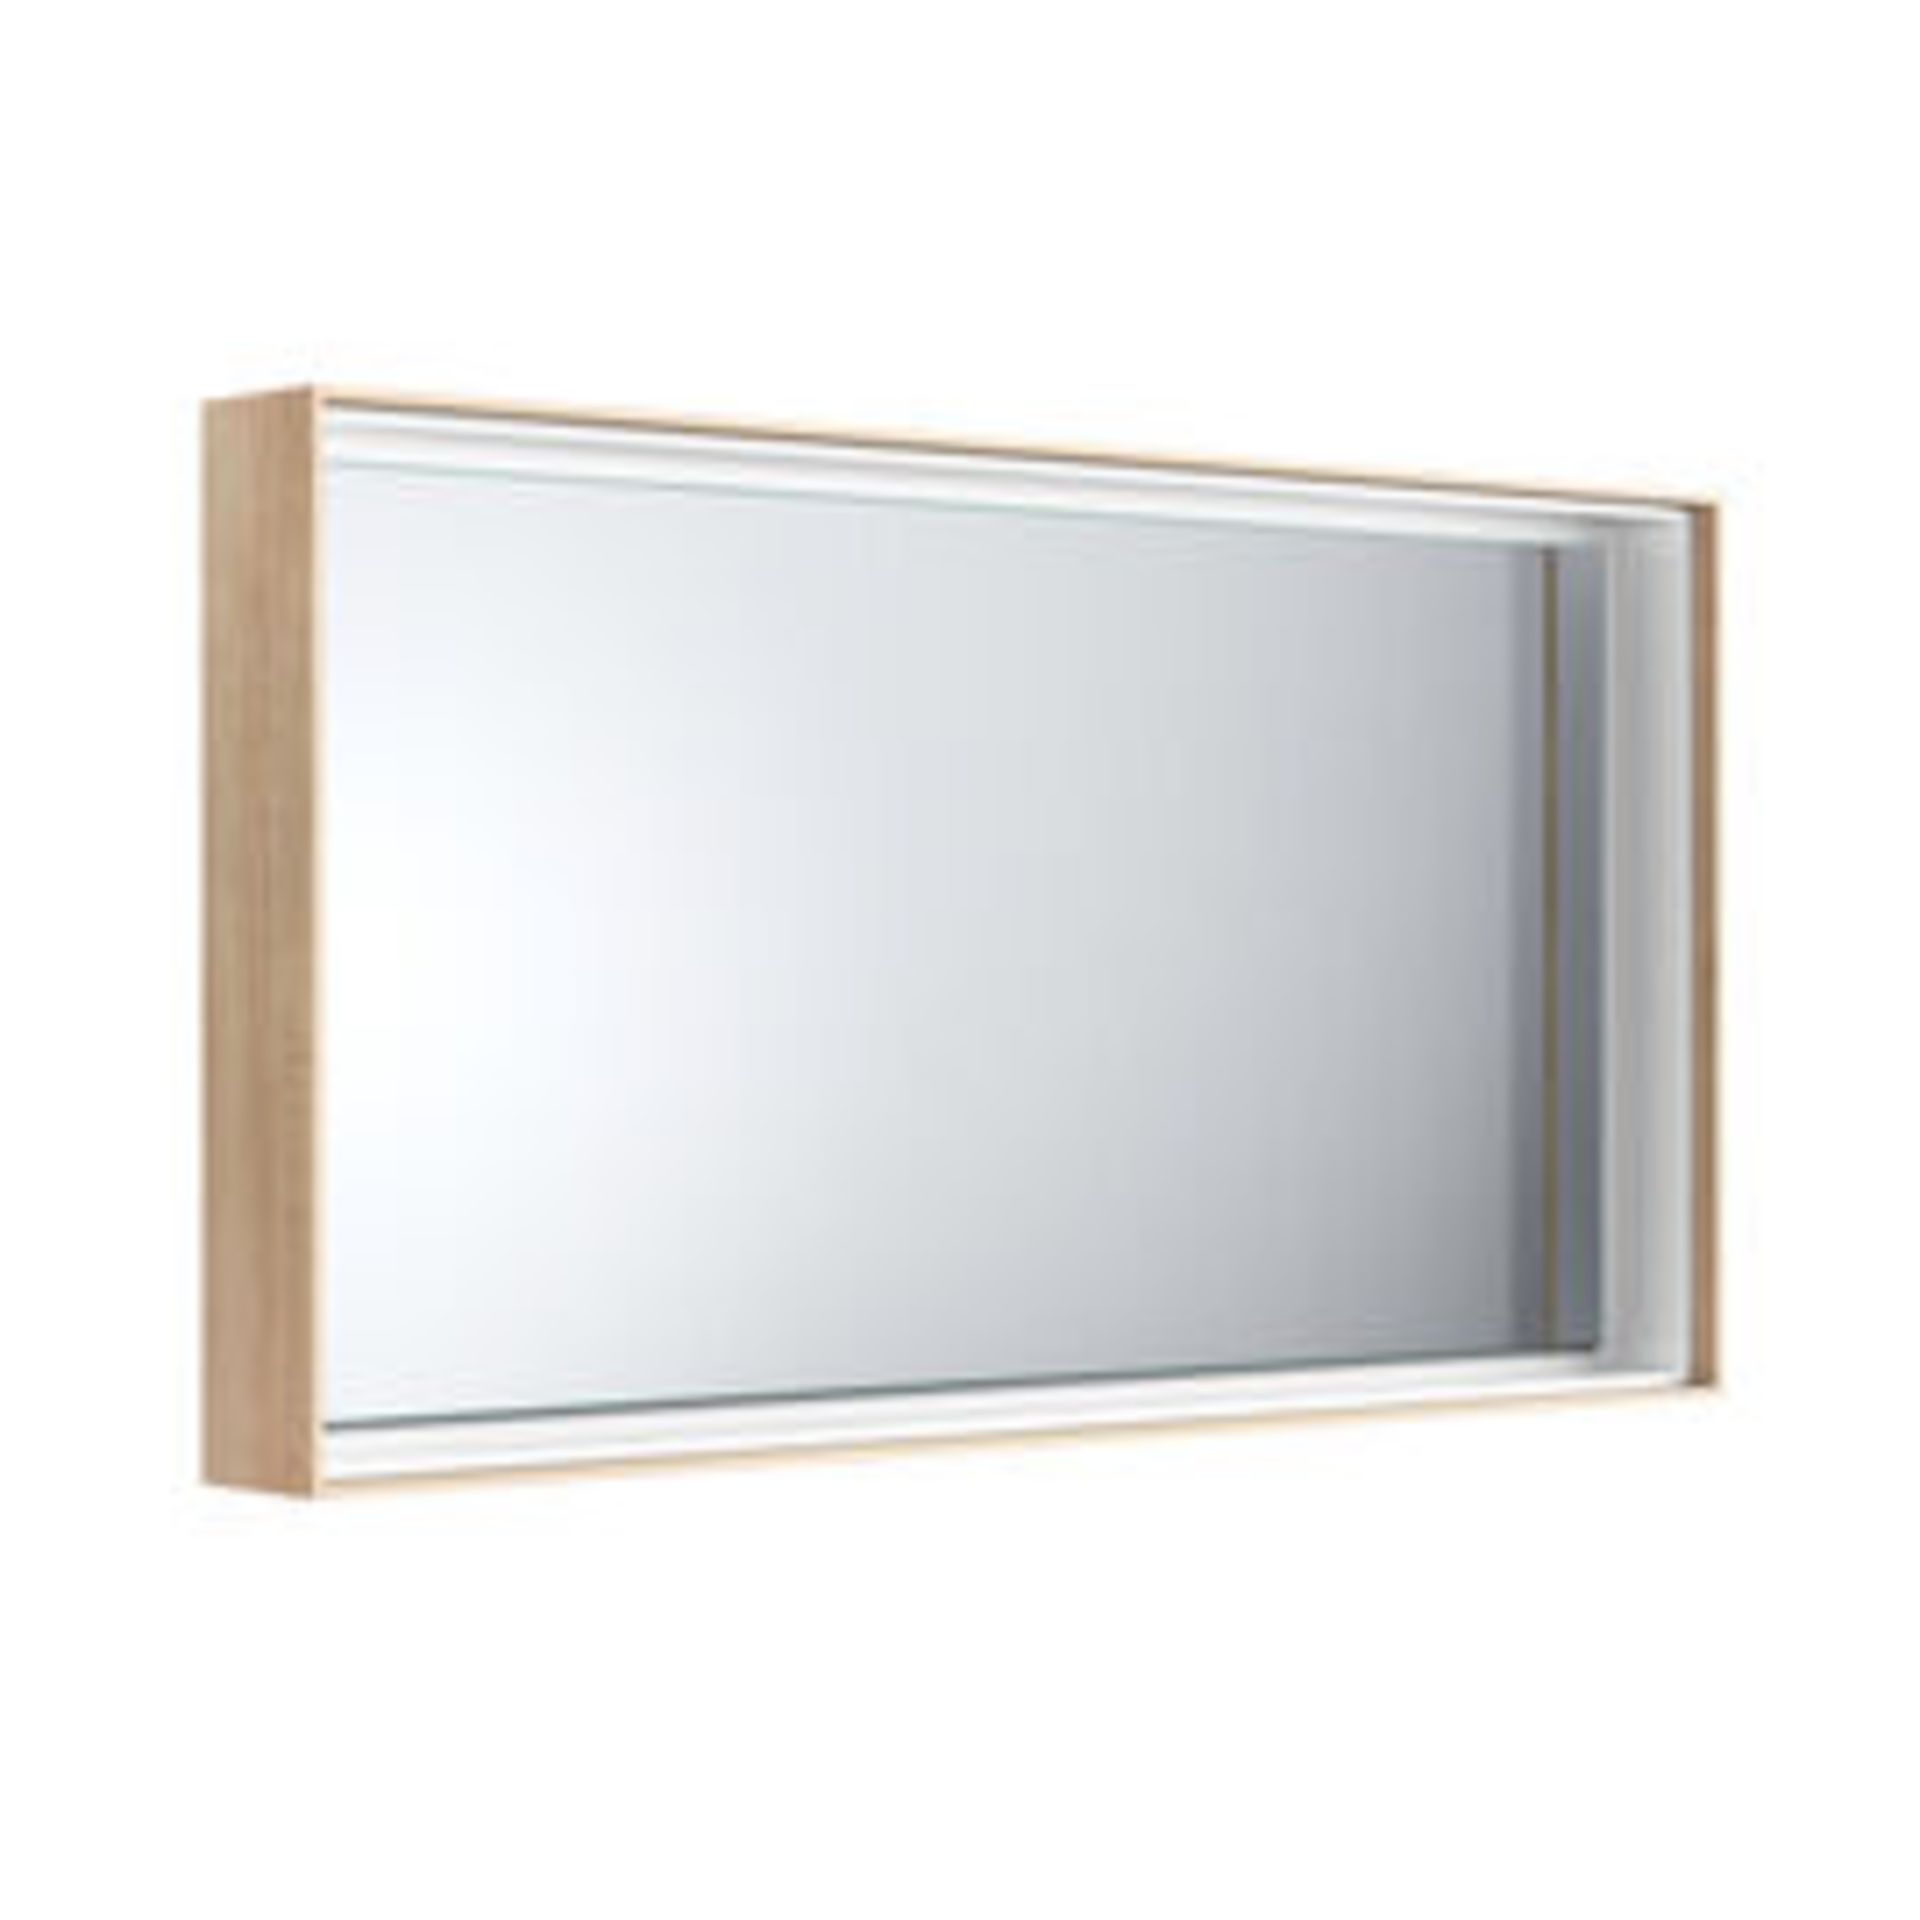 (TT9) 1270x720mm Berg Mirror. RRP £249.99. If youre looking for a touch of spa-like Zen, the ... - Image 3 of 3